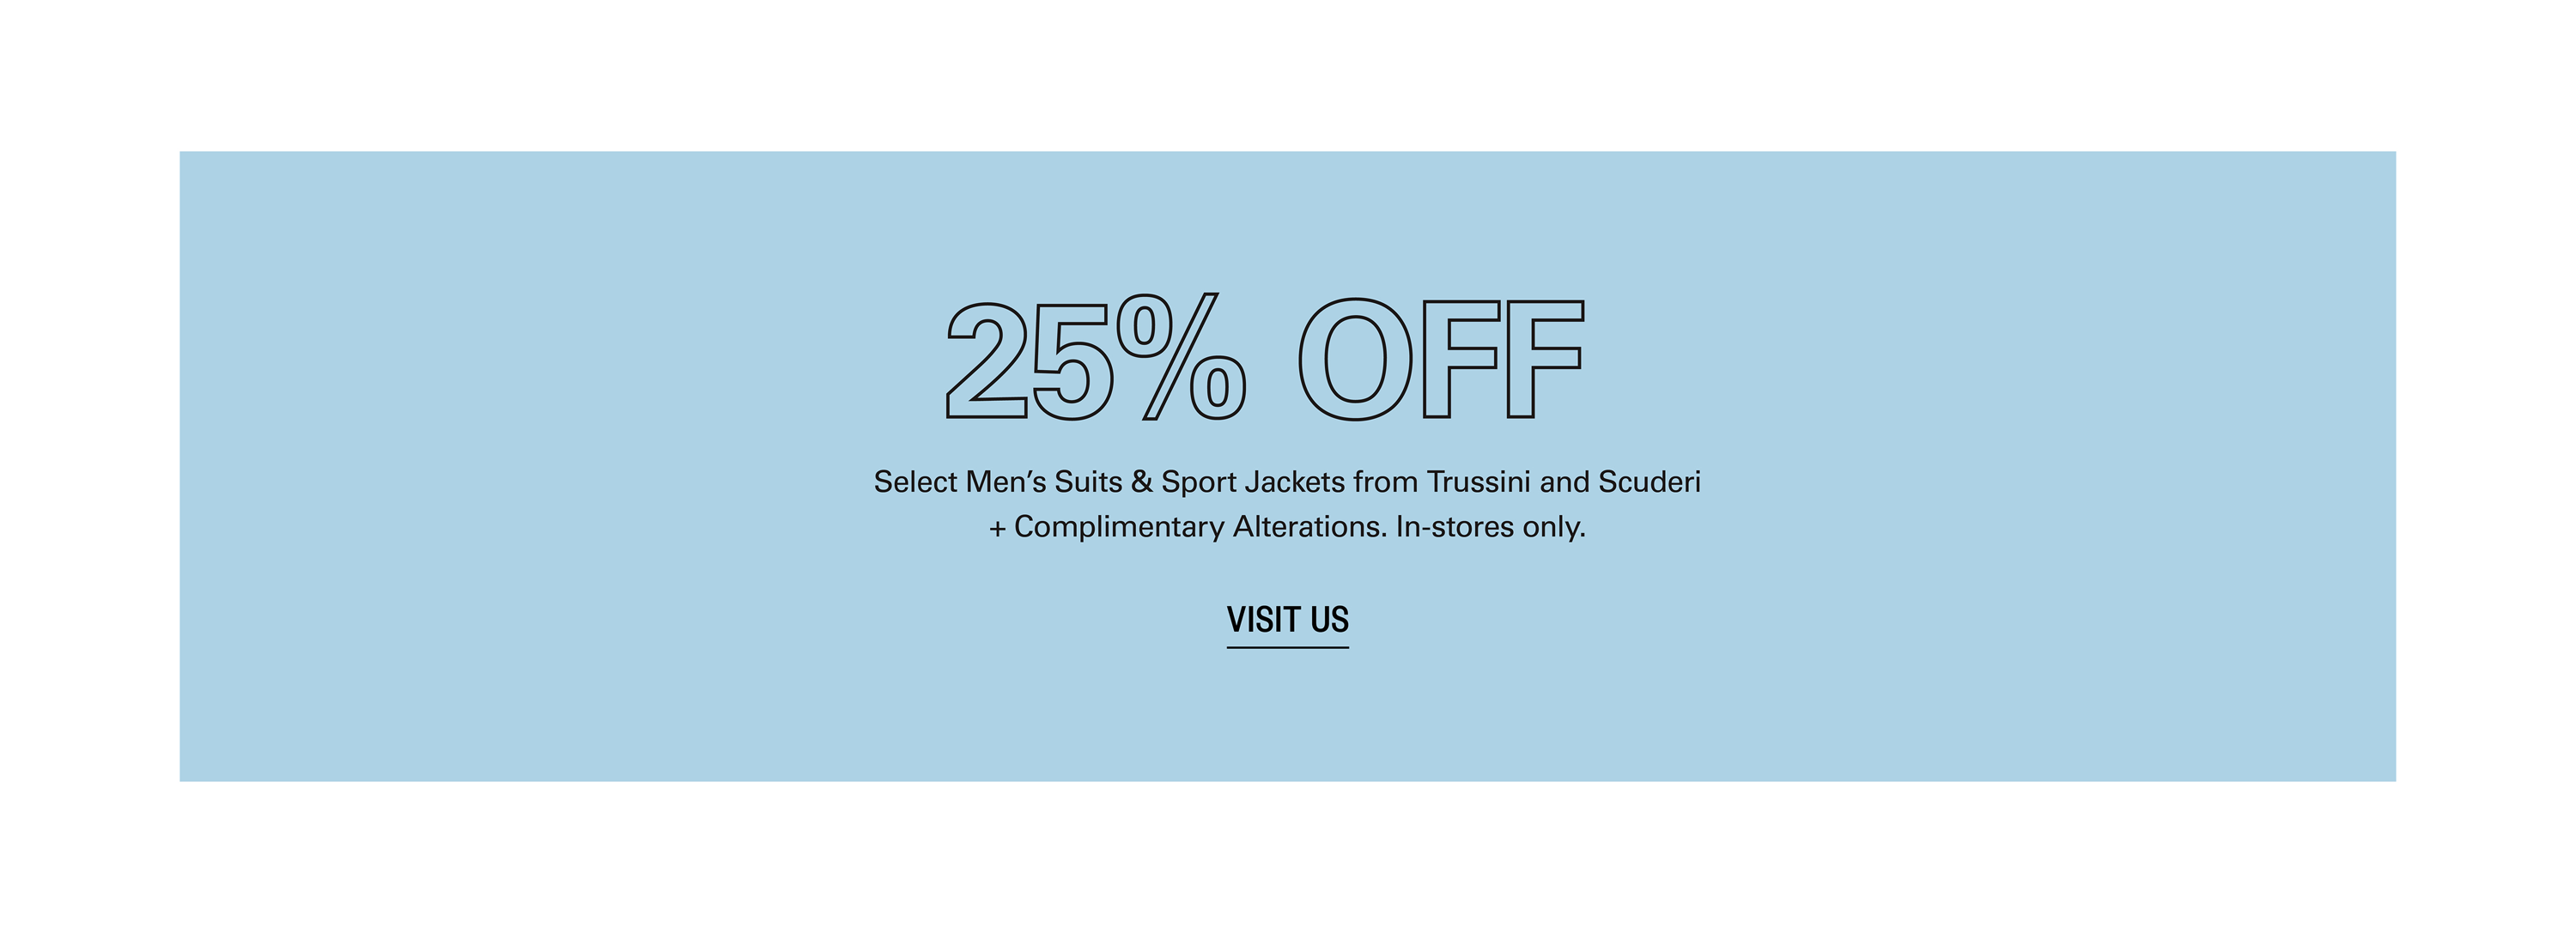 25% of Select Suits & Sport Jackets